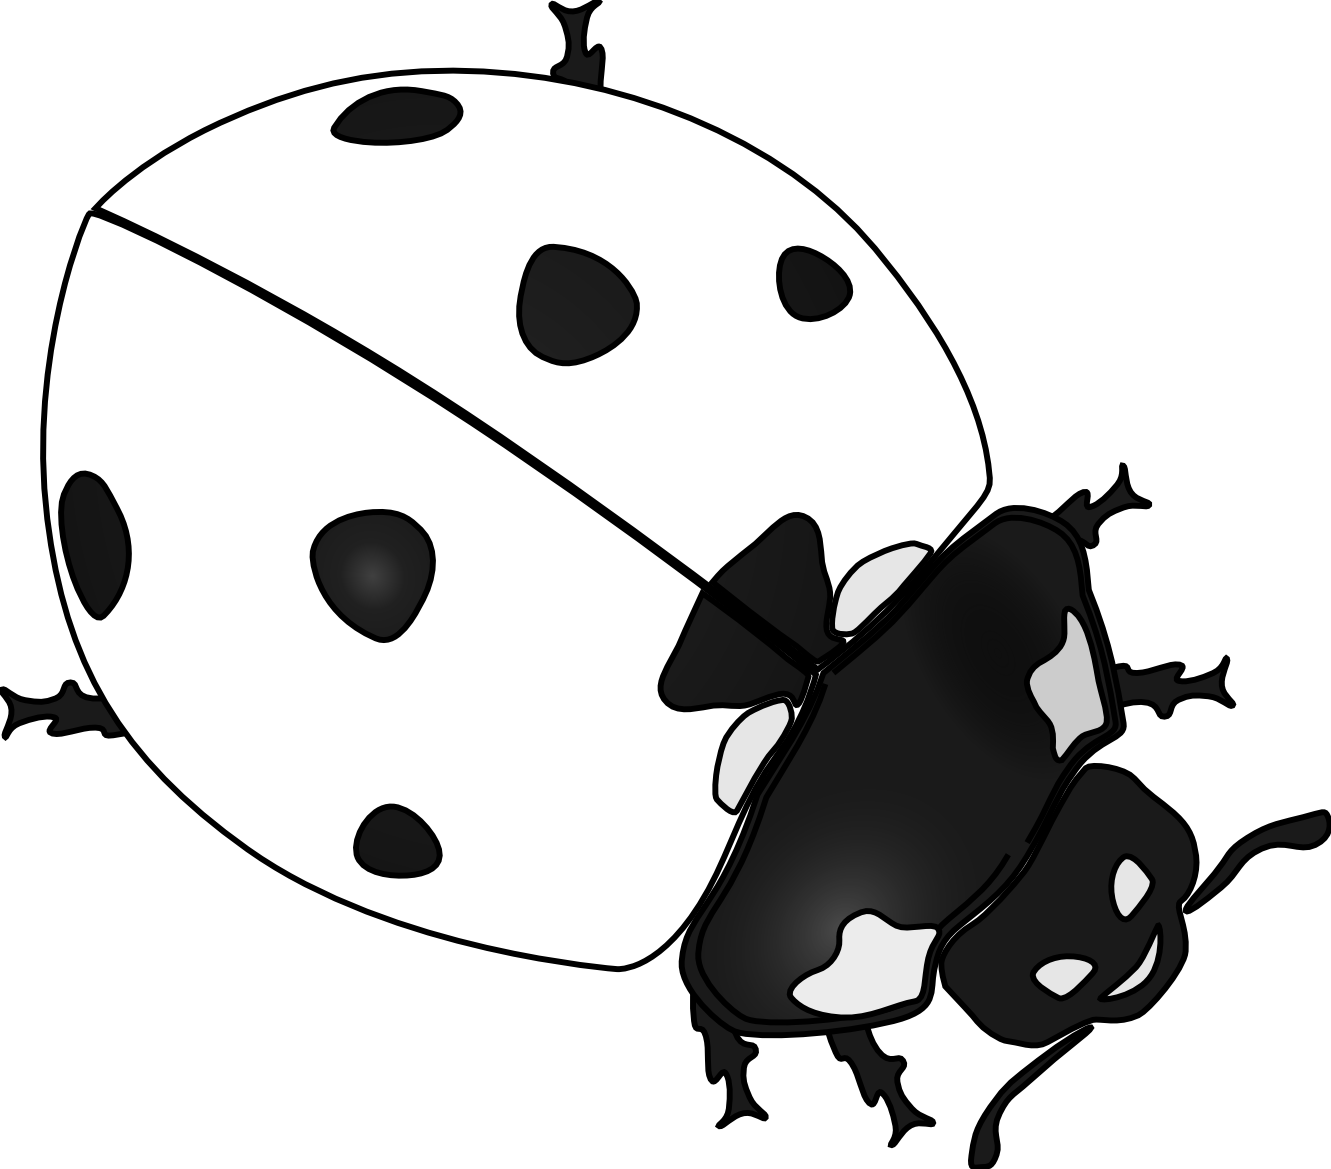 Insect black and white. Ladybug clipart sketch